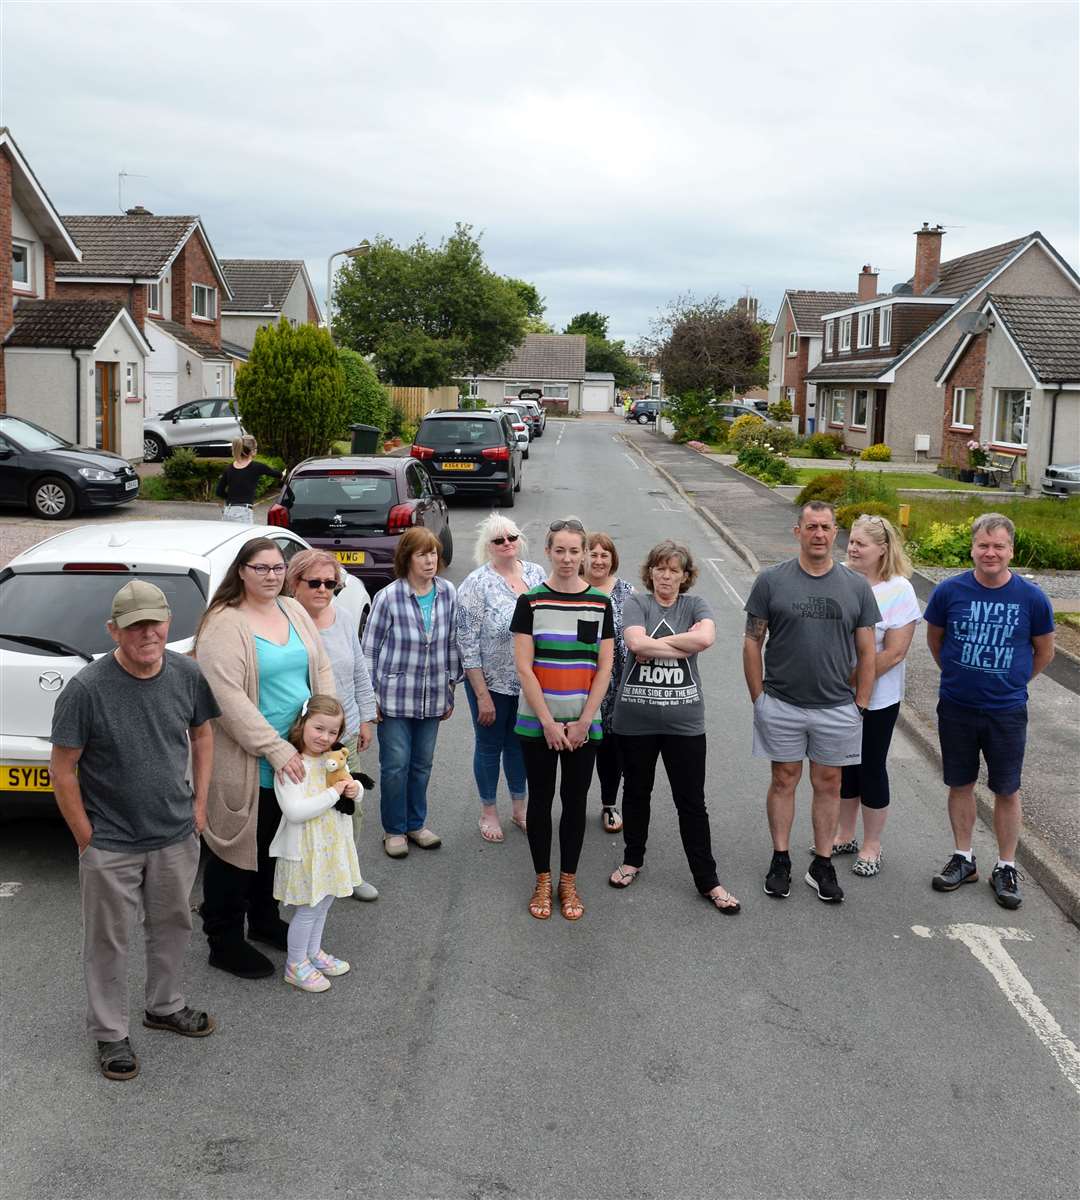 Drakies residents campaigning earlier this year against the creation of an access road from Sir Walter Scott Drive into a cul-de-sac in Drumossie Avenue.